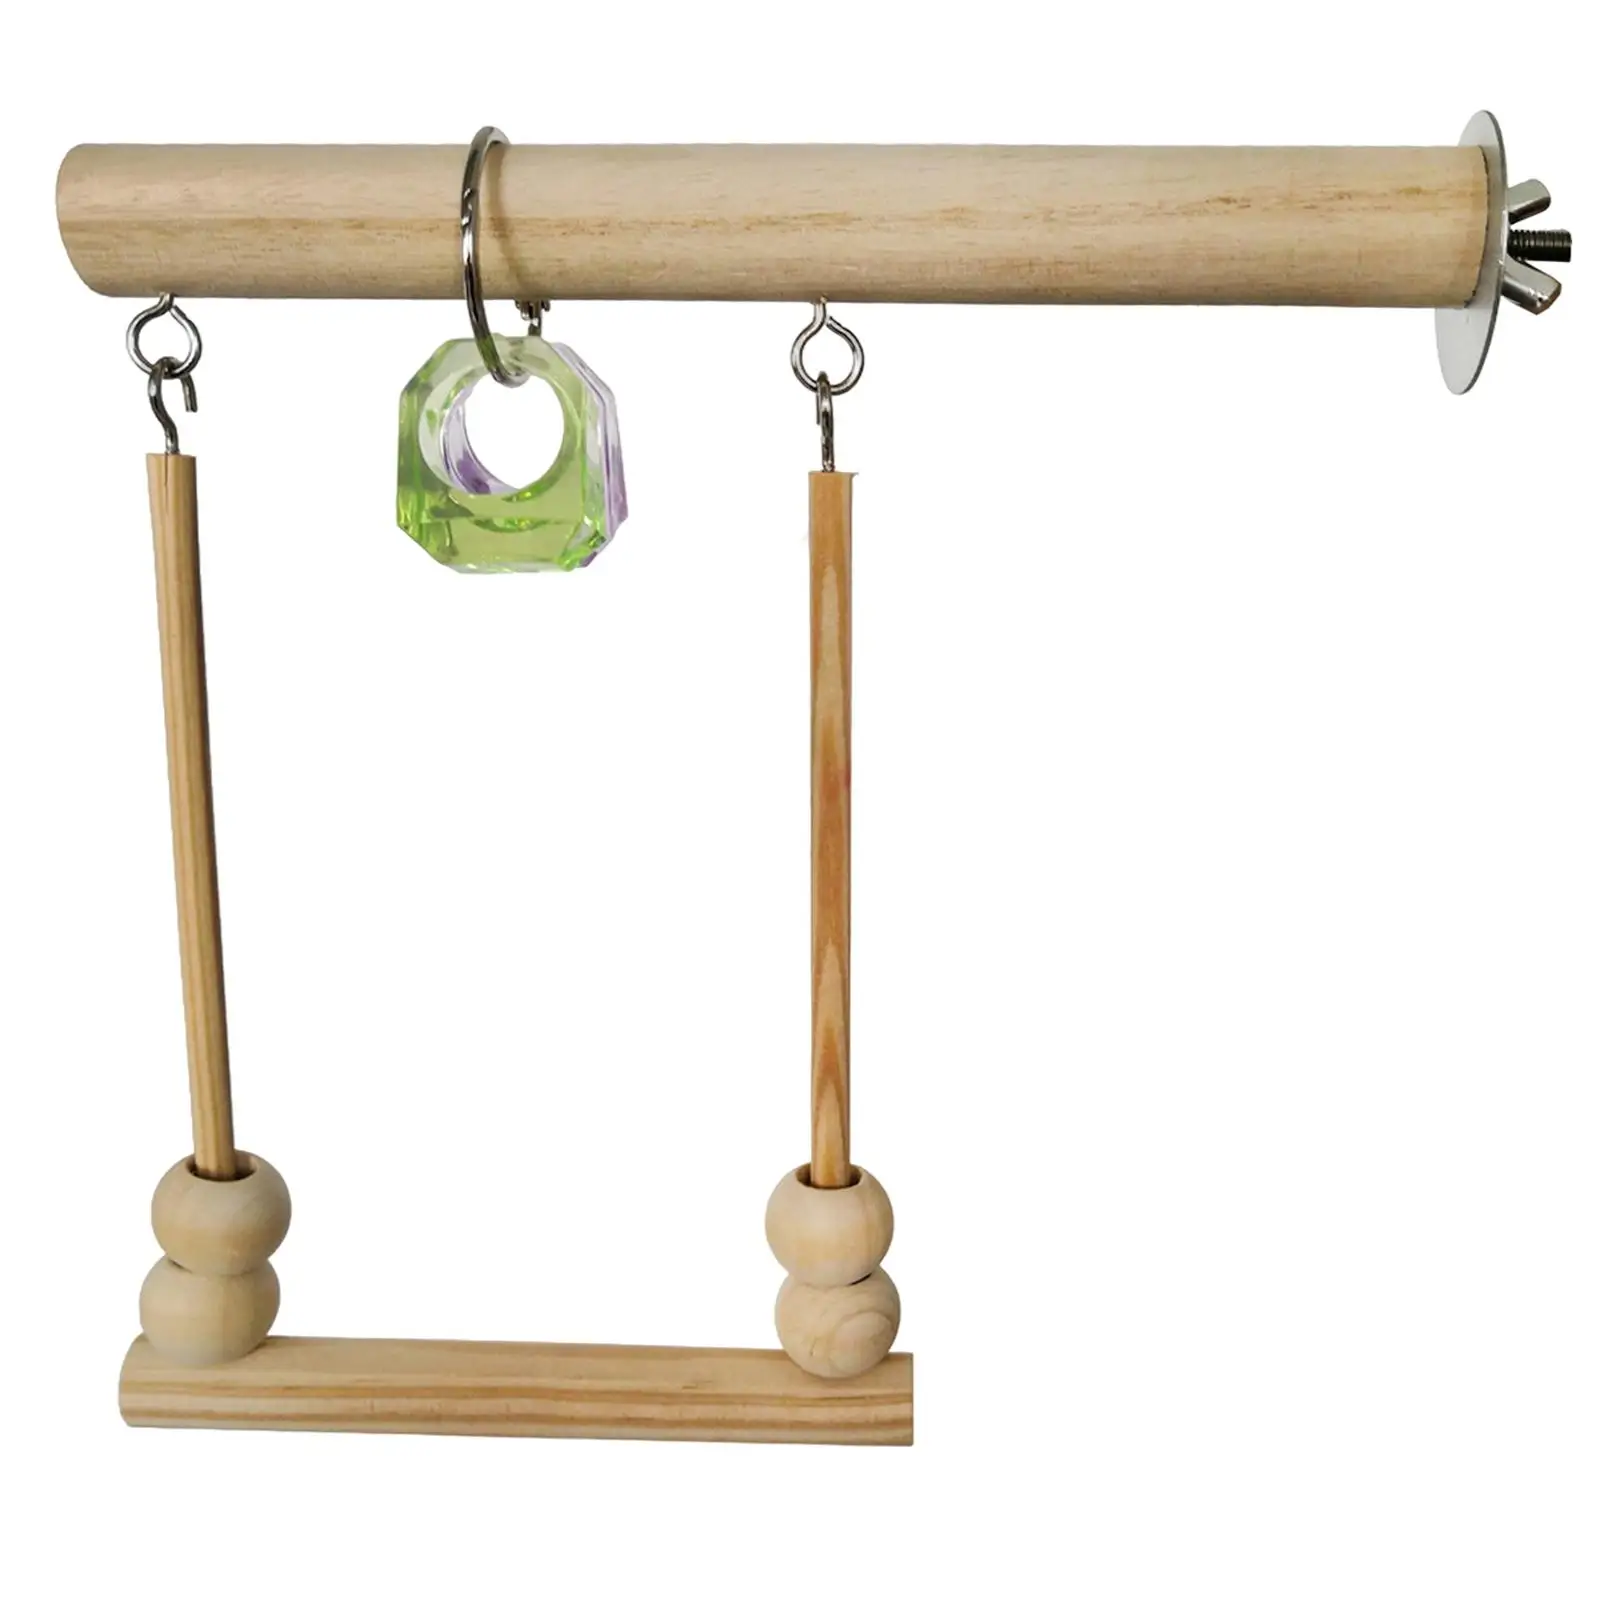 Parrot Wooden Stand Swing Cage Hanging with Chewing Bead Encourages Foot